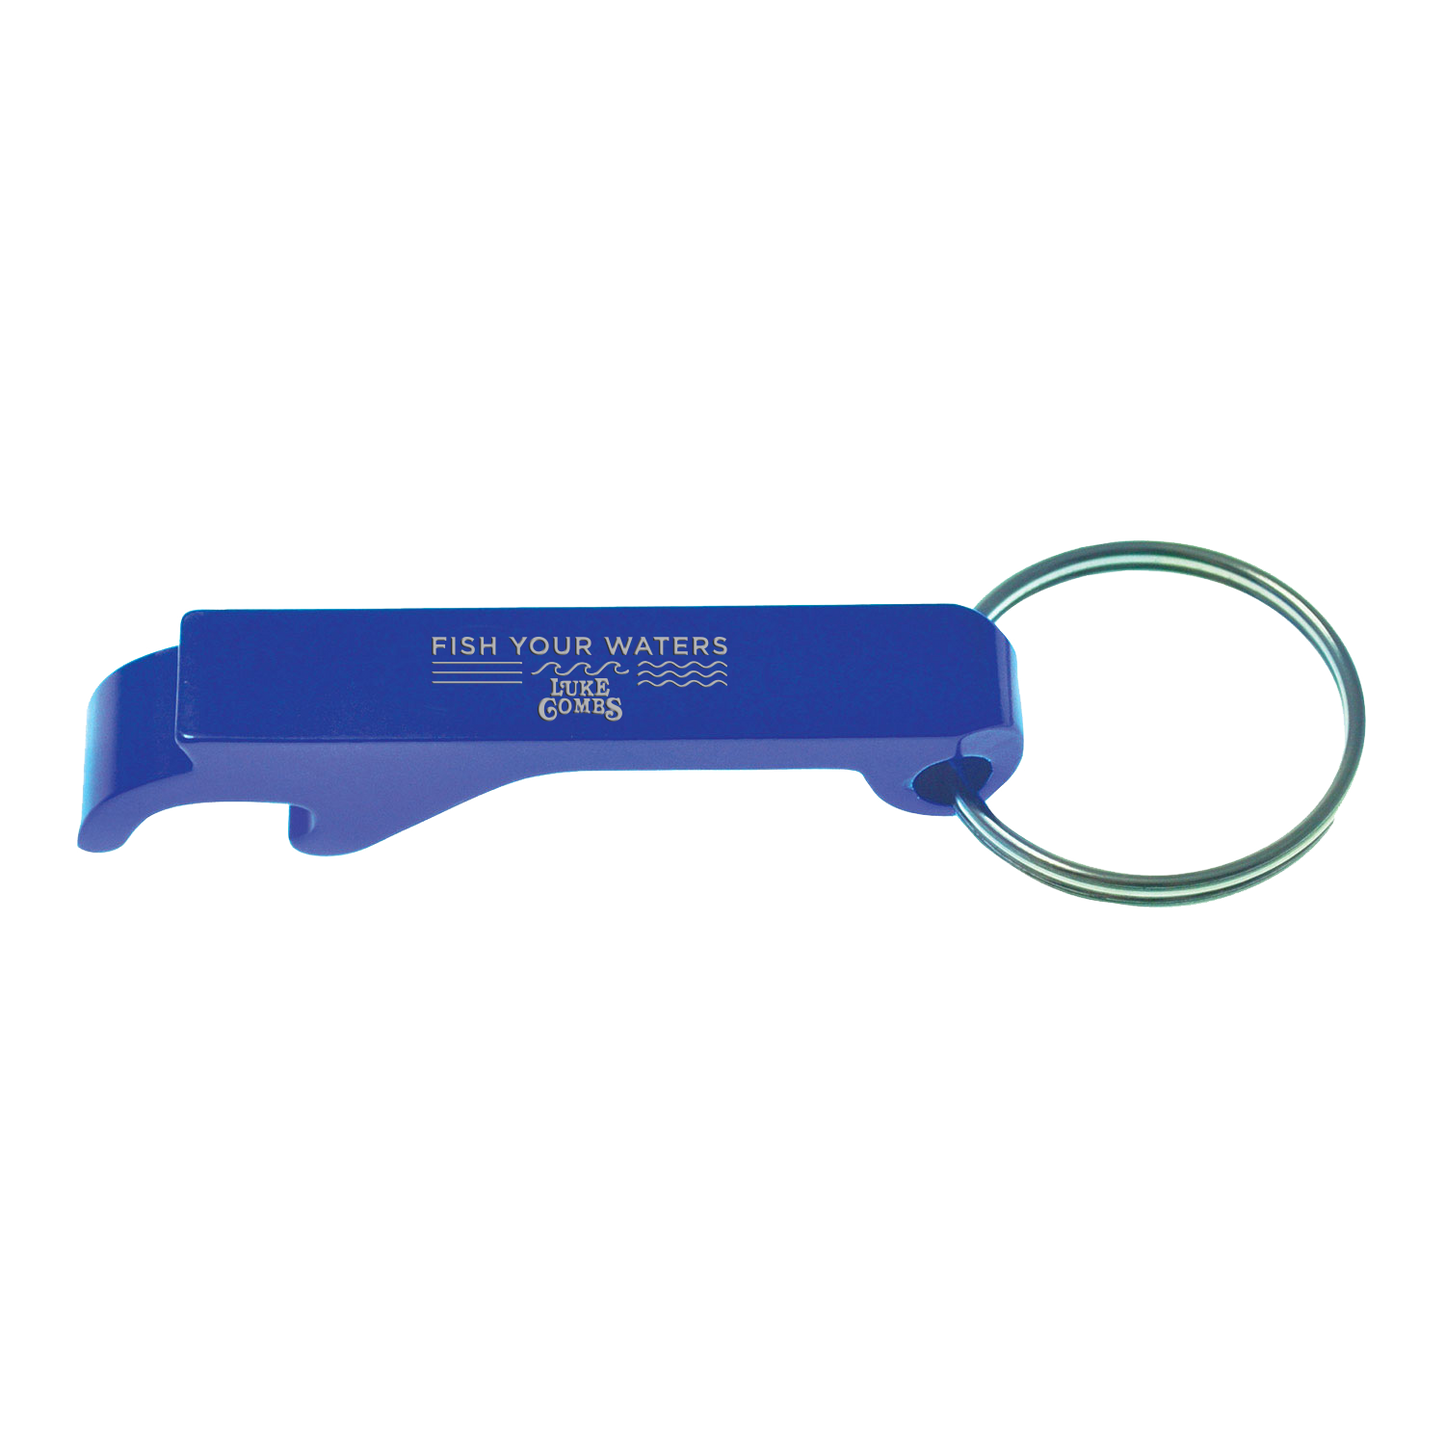 Angler's Choice Keychain Ring Bottle Opener - Angler's Choice Tackle